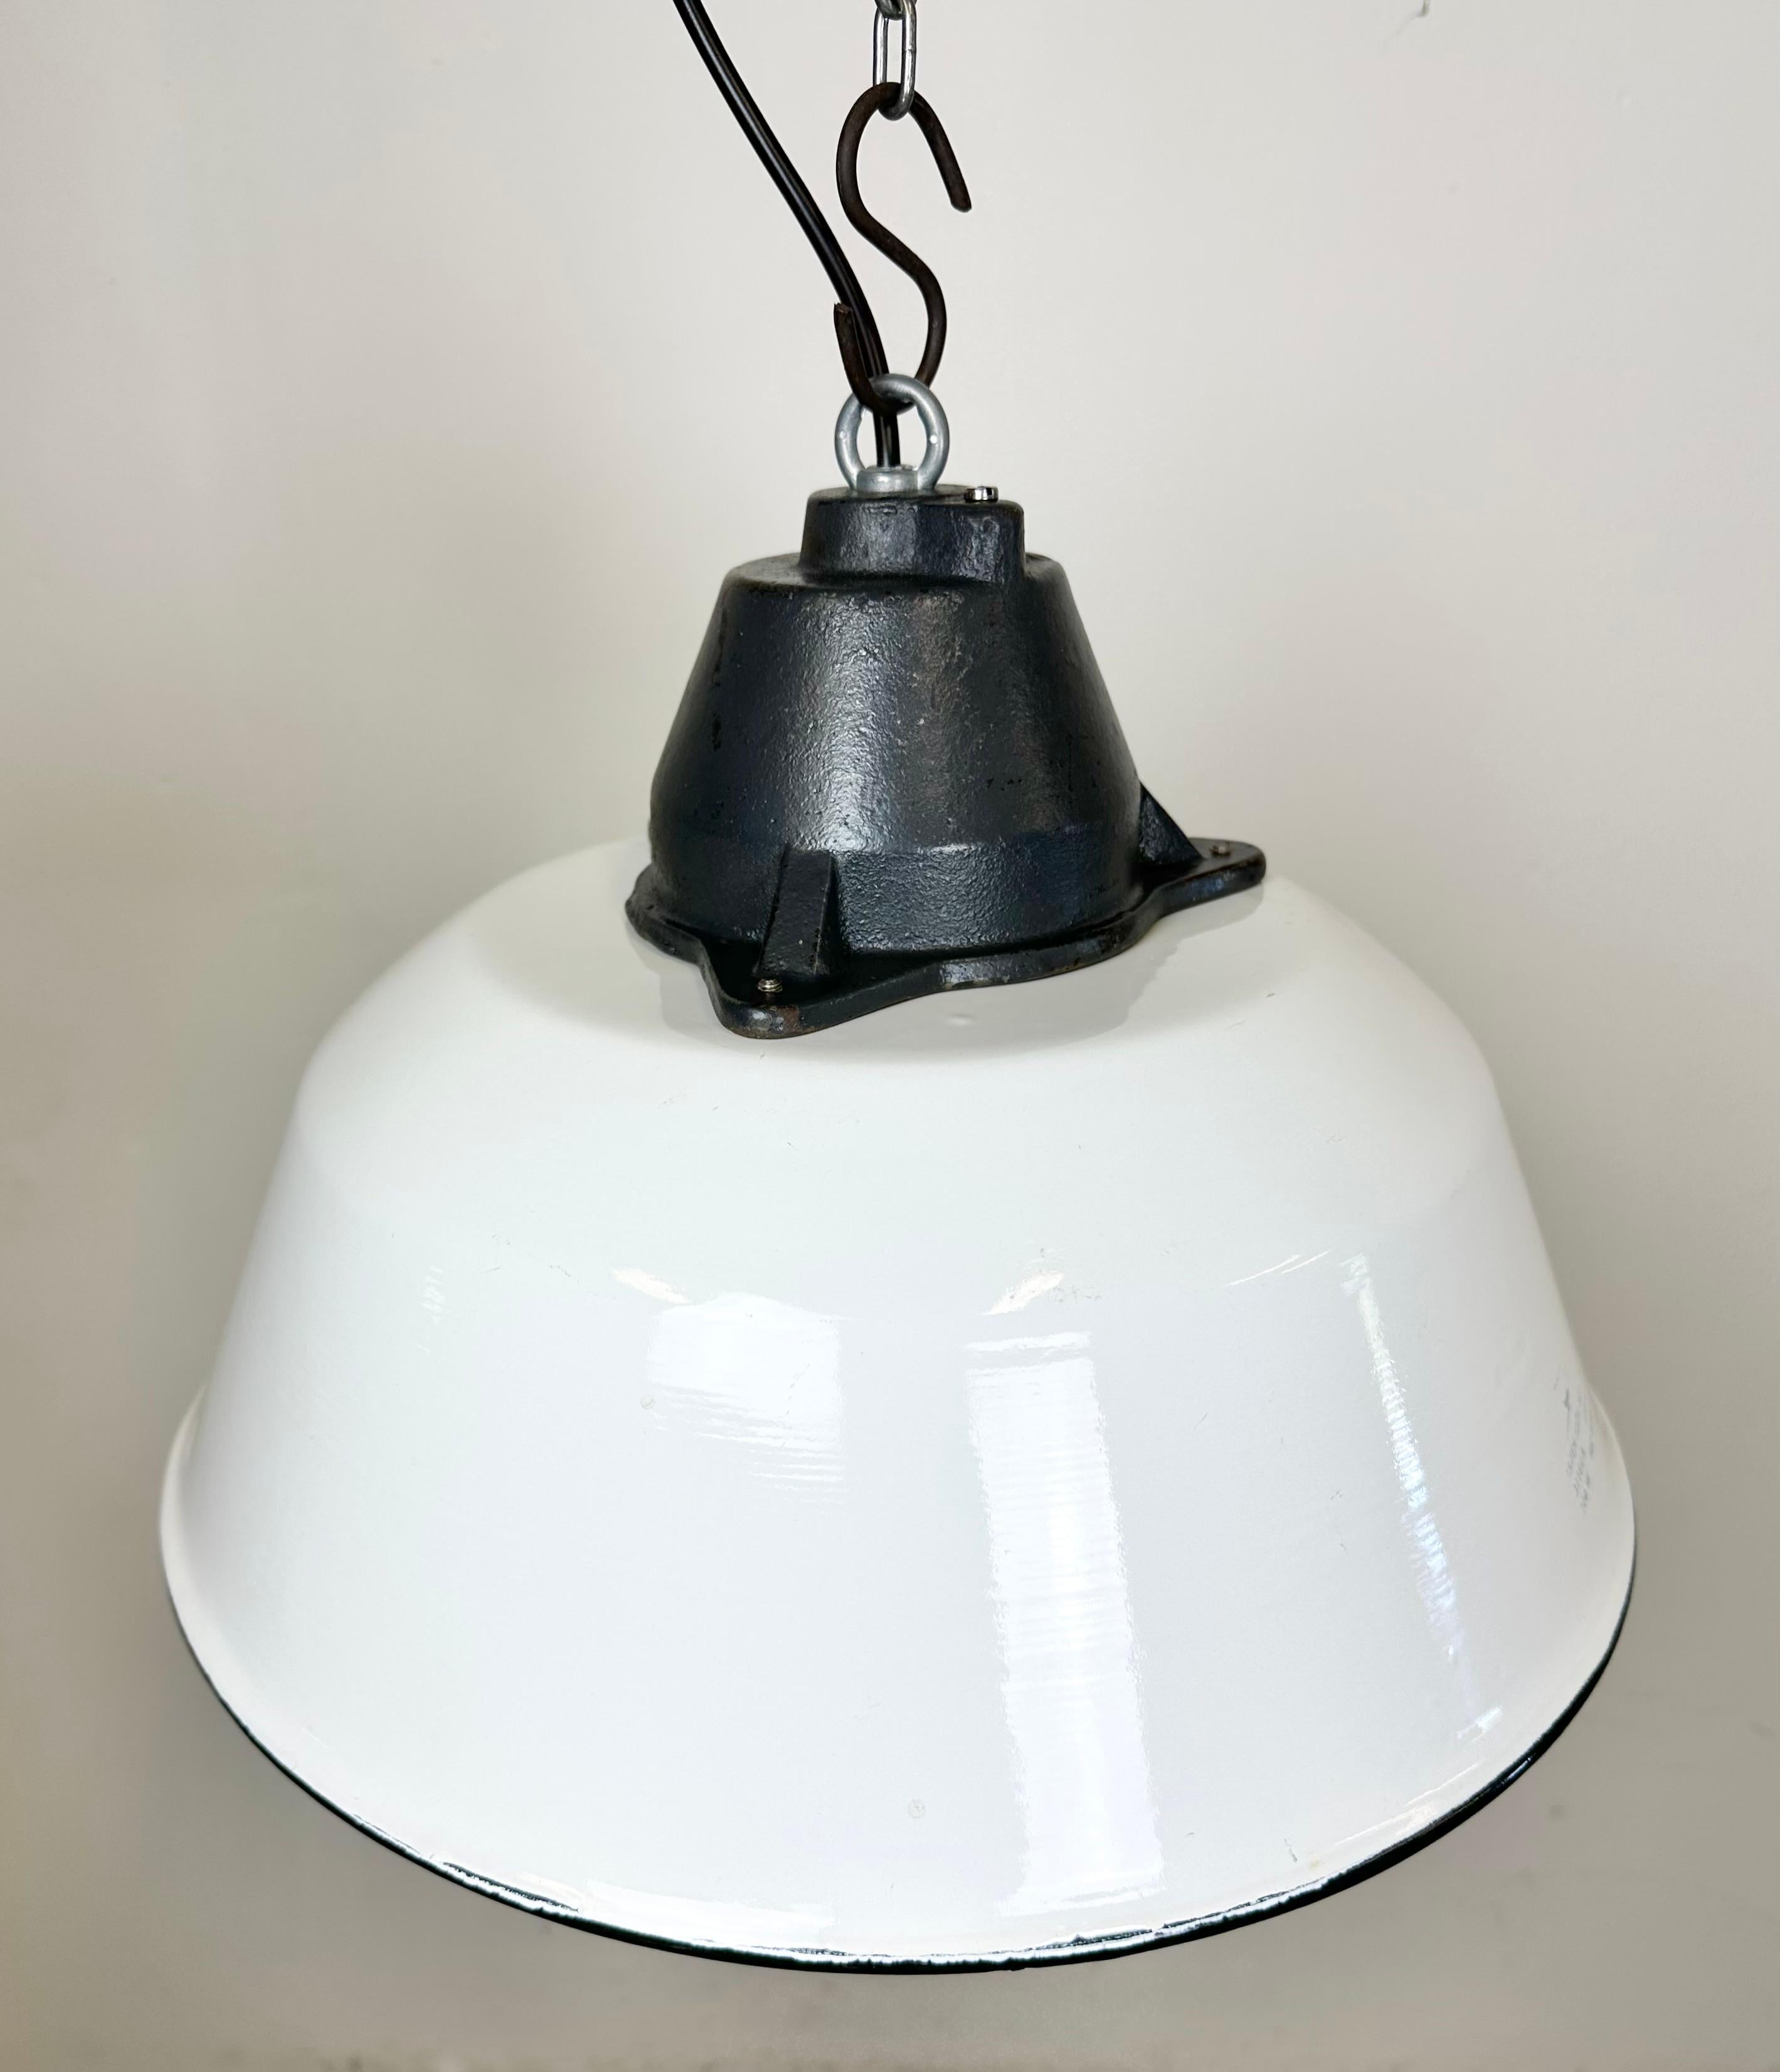 White Enamel and Cast Iron Industrial Pendant Light with Glass Cover, 1960s For Sale 3